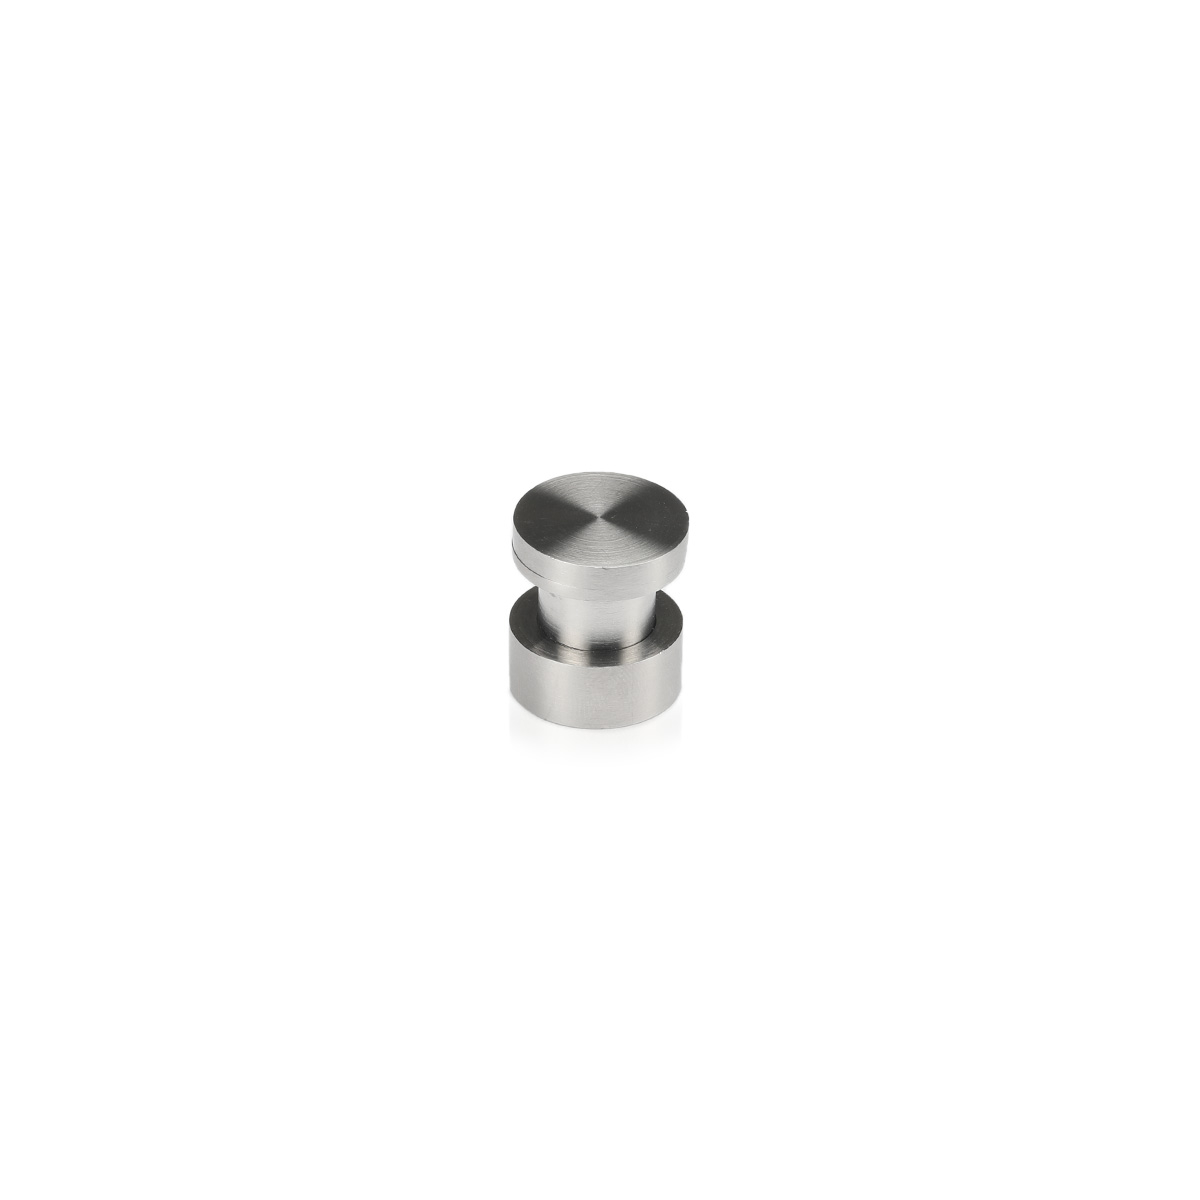 3/4'' Diameter X 5/16'' Barrel Length Stainless Steel (316) Panel Mount Standoffs, Flat Head Satin Brushed Finish (for Inside or Outside Use) Material Thick. Accepted 5/16'' to 3/8'' [Required Material Hole Size: 9/16'']